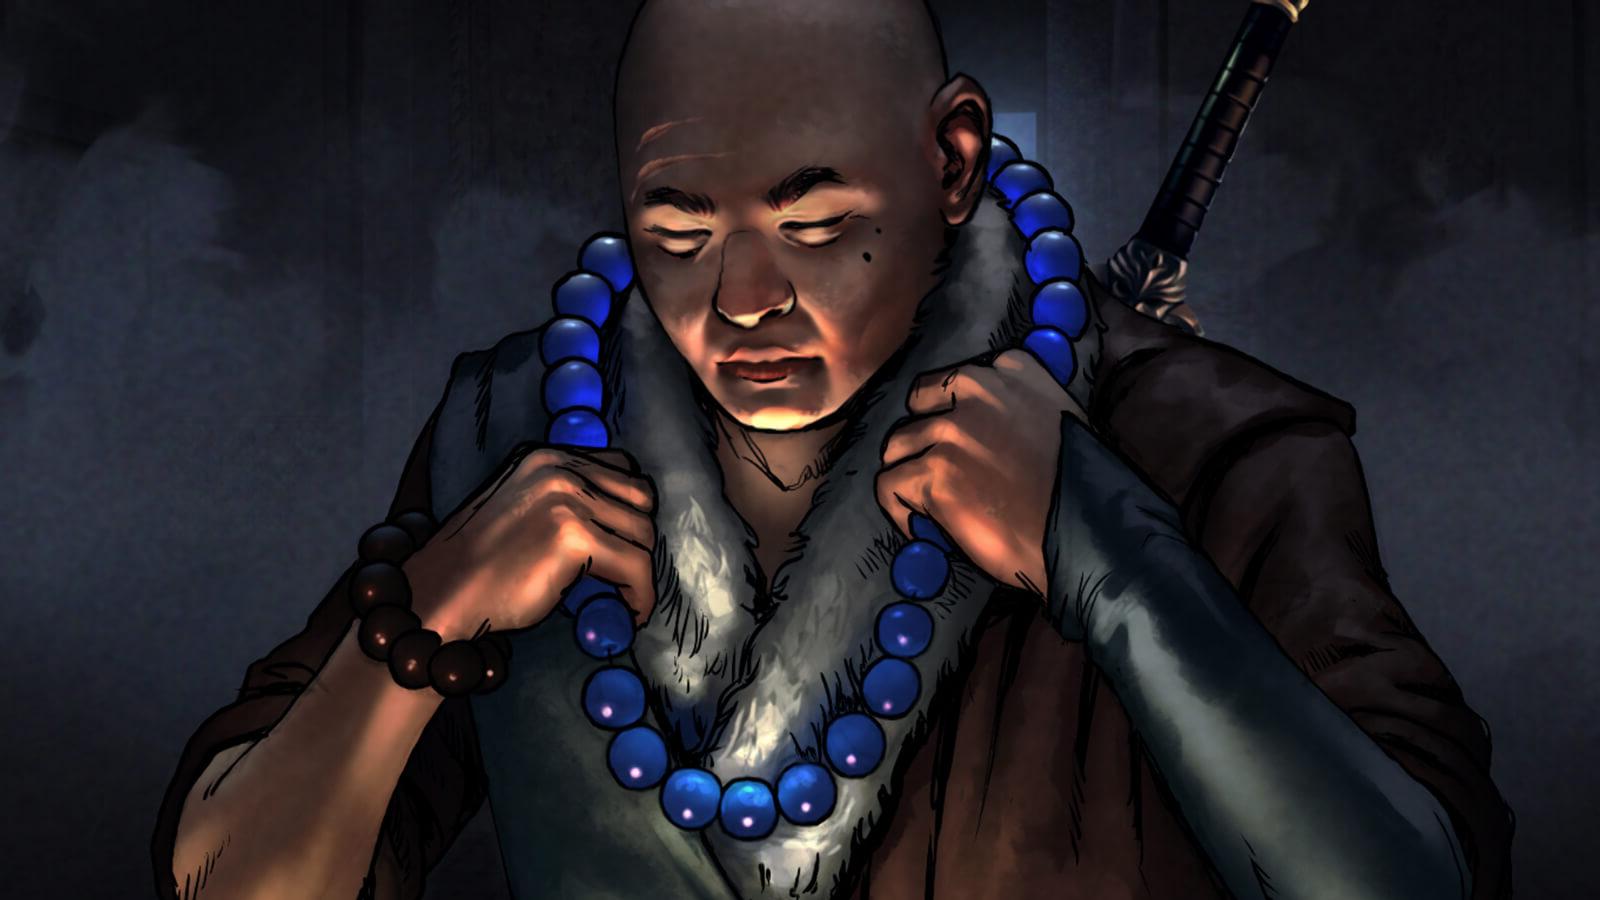 A bald man with a sword on his back, 从下面点燃, puts on a necklace of brilliant blue spheres in a darkened room